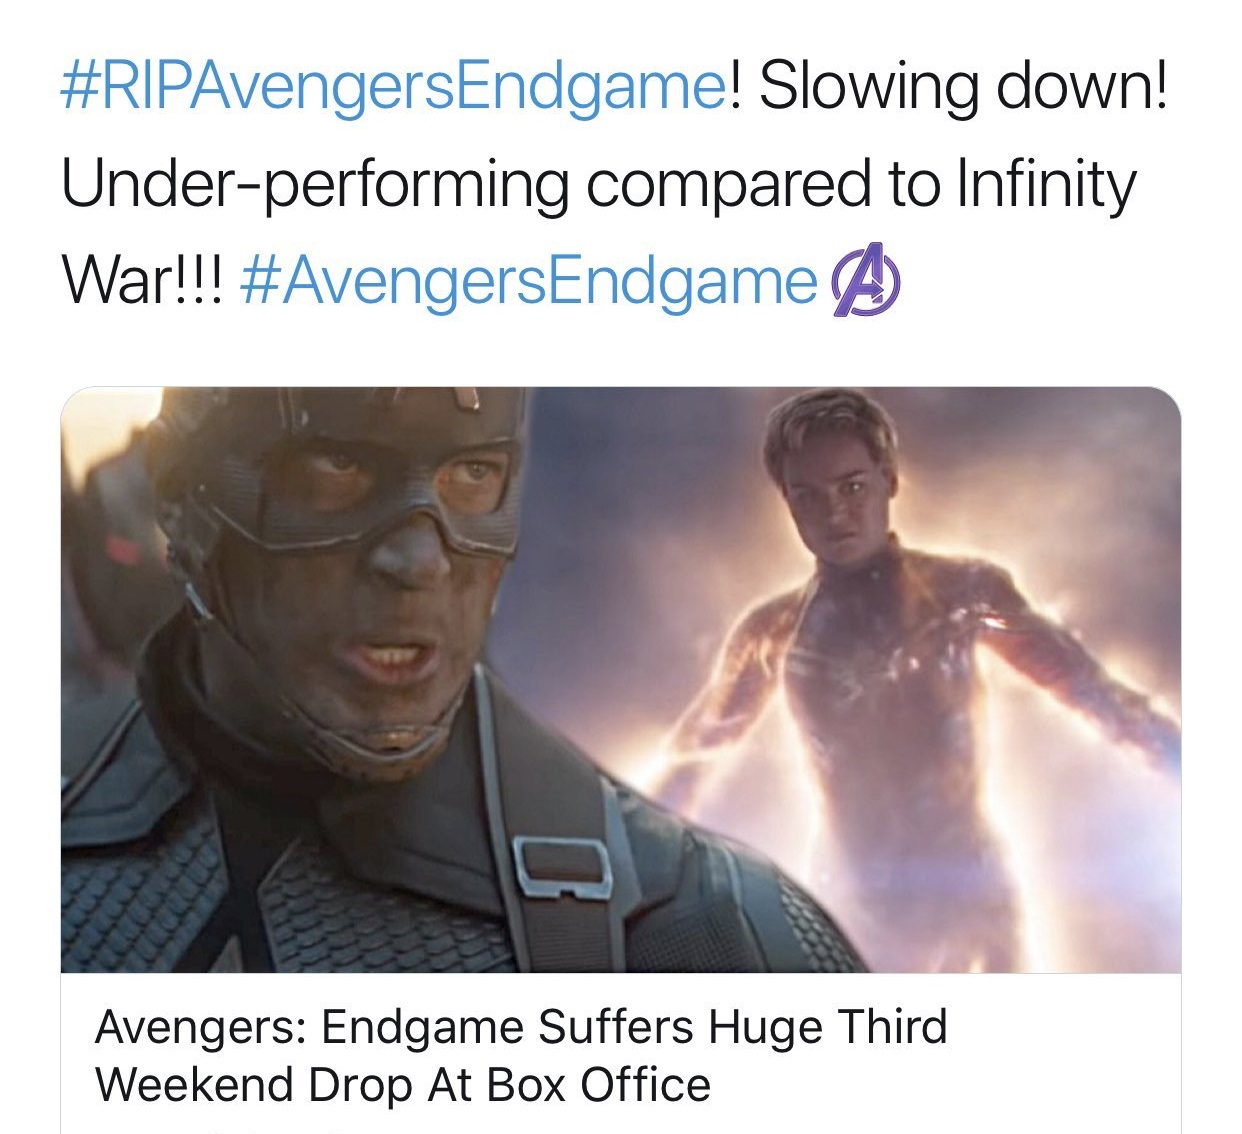 copyright statement - ! Slowing down! Underperforming compared to Infinity War!!! A Avengers Endgame Suffers Huge Third Weekend Drop At Box Office